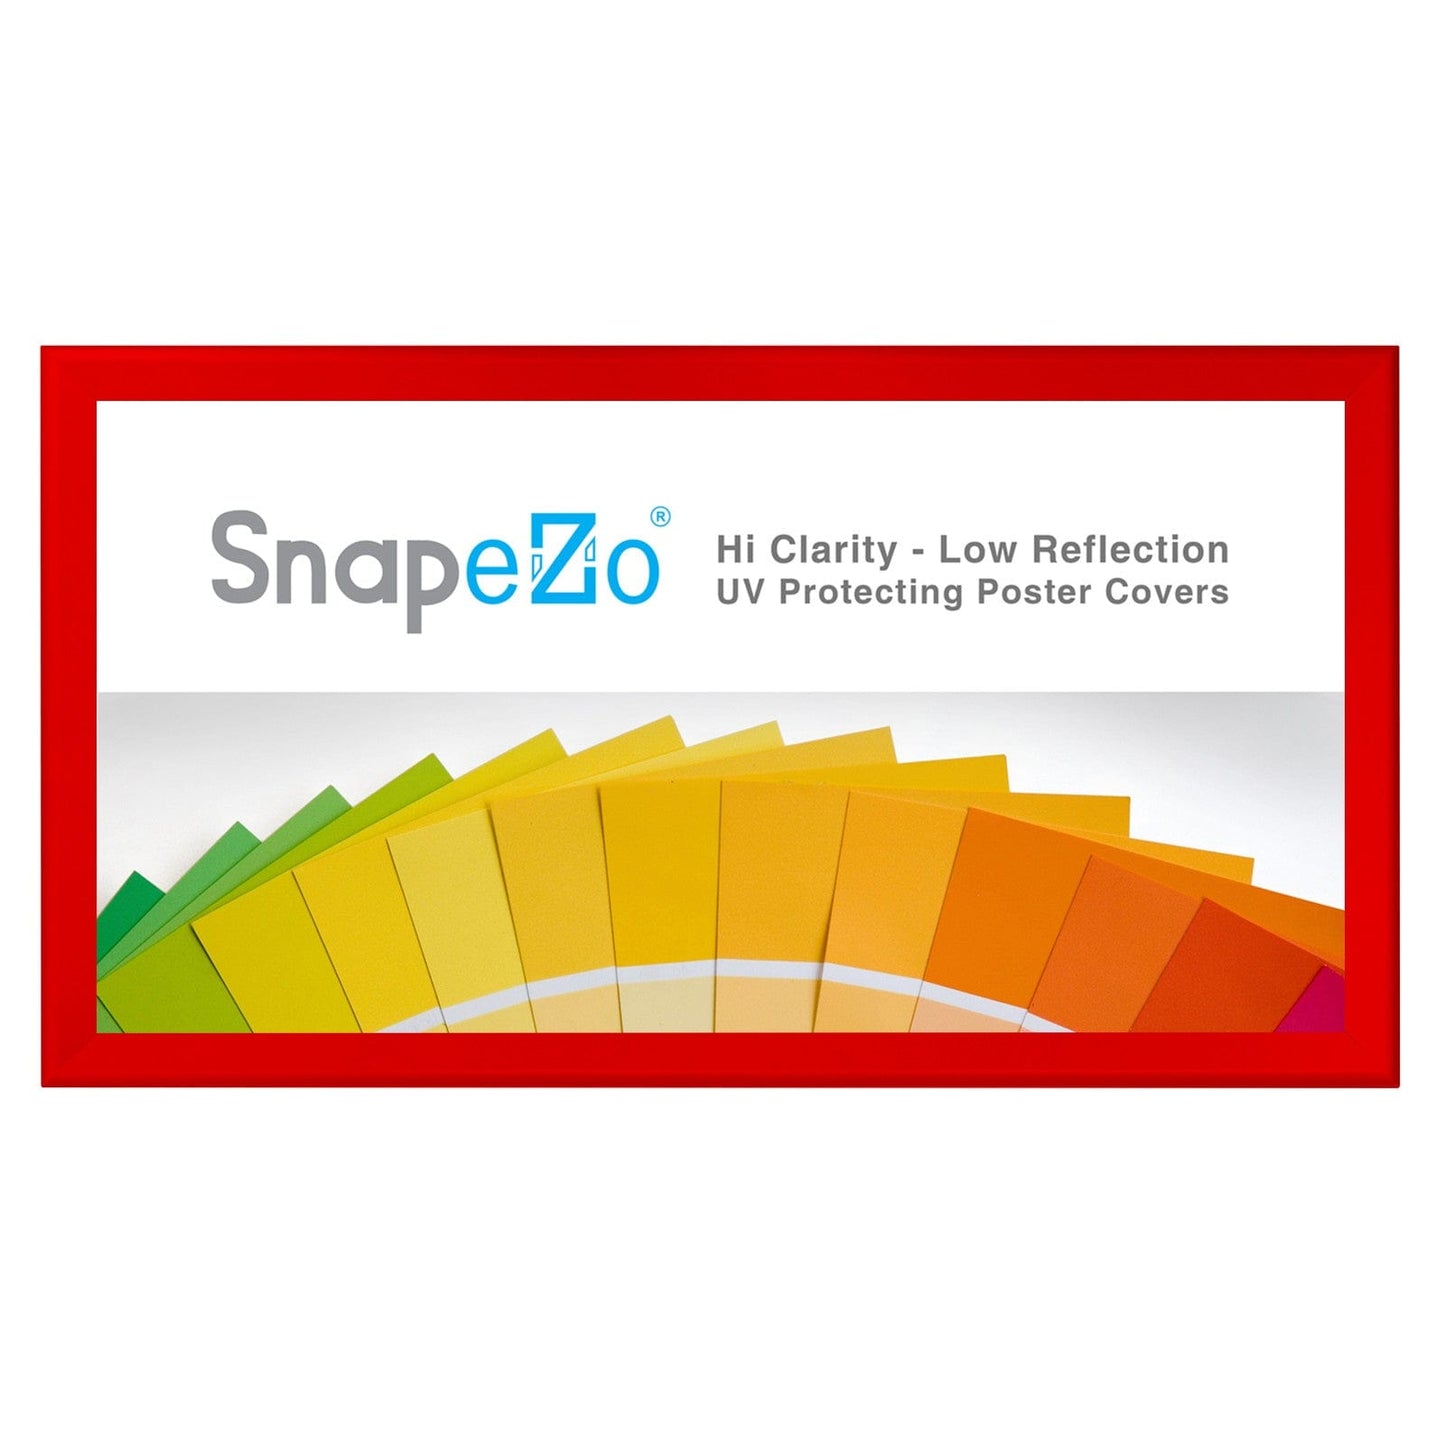 21x62 Red SnapeZo® Snap Frame - 1.7" Profile - Snap Frames Direct